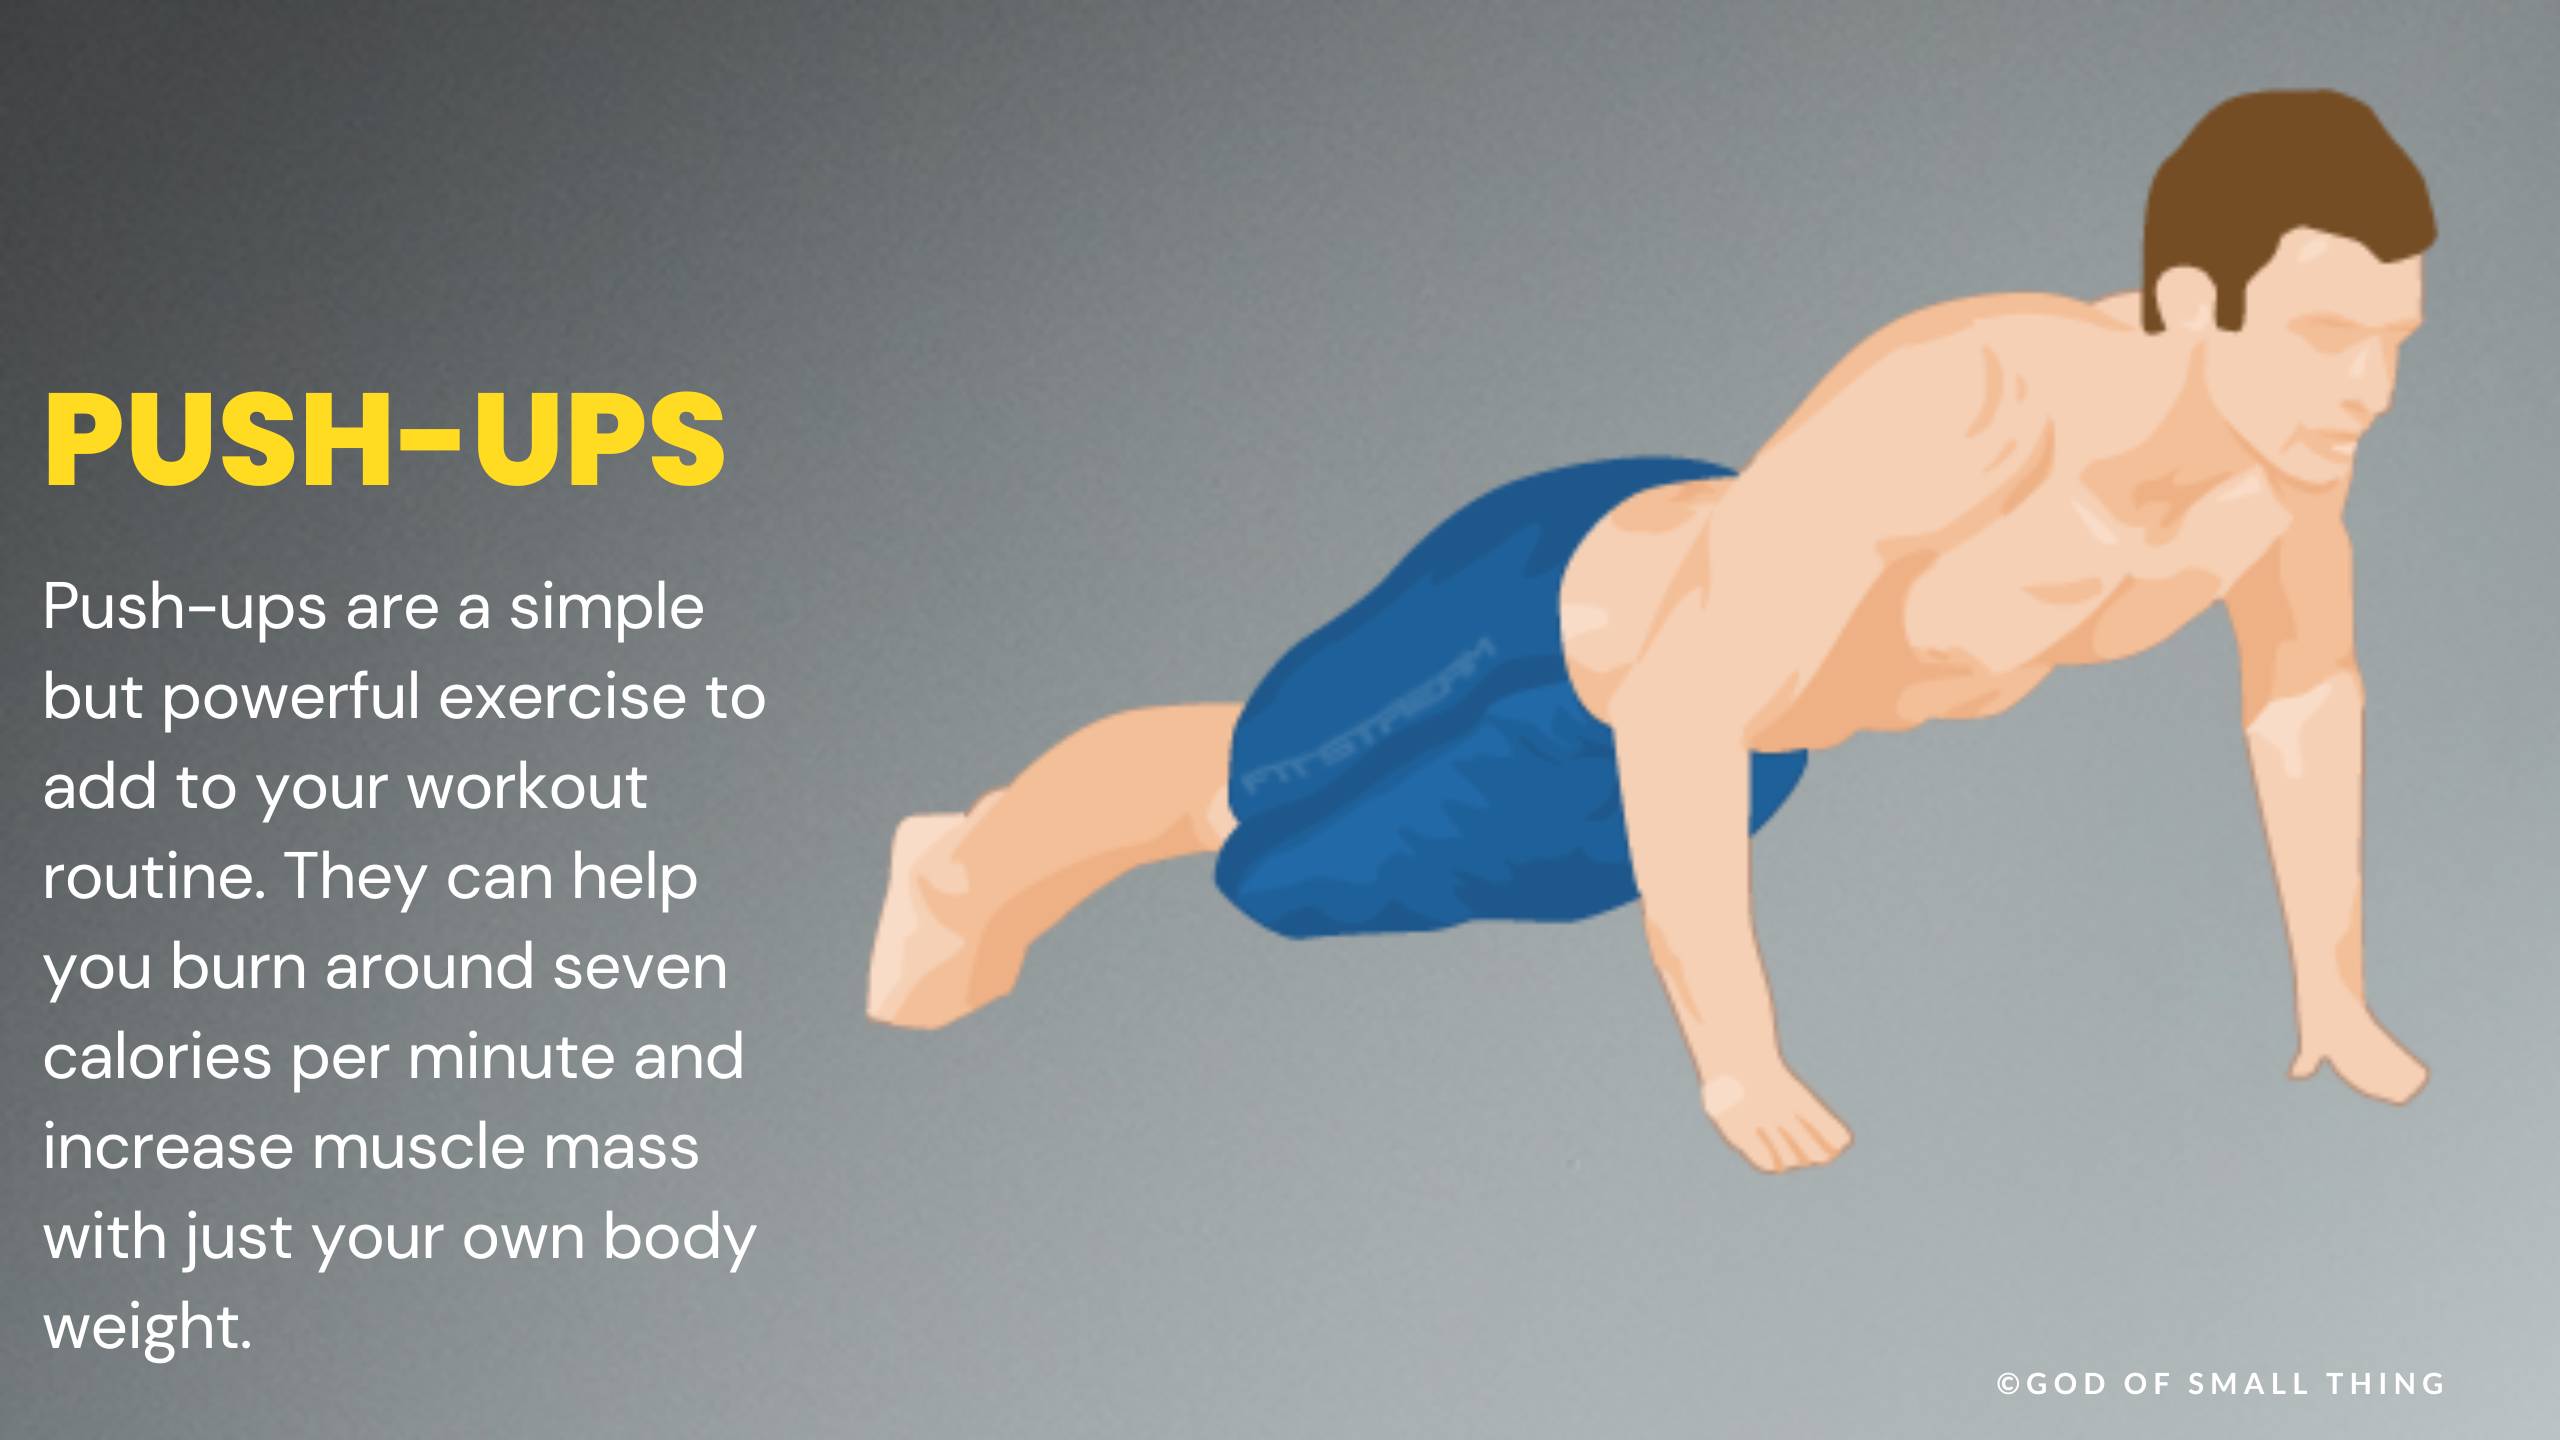 HIIT Workout Push-ups for Weight Loss